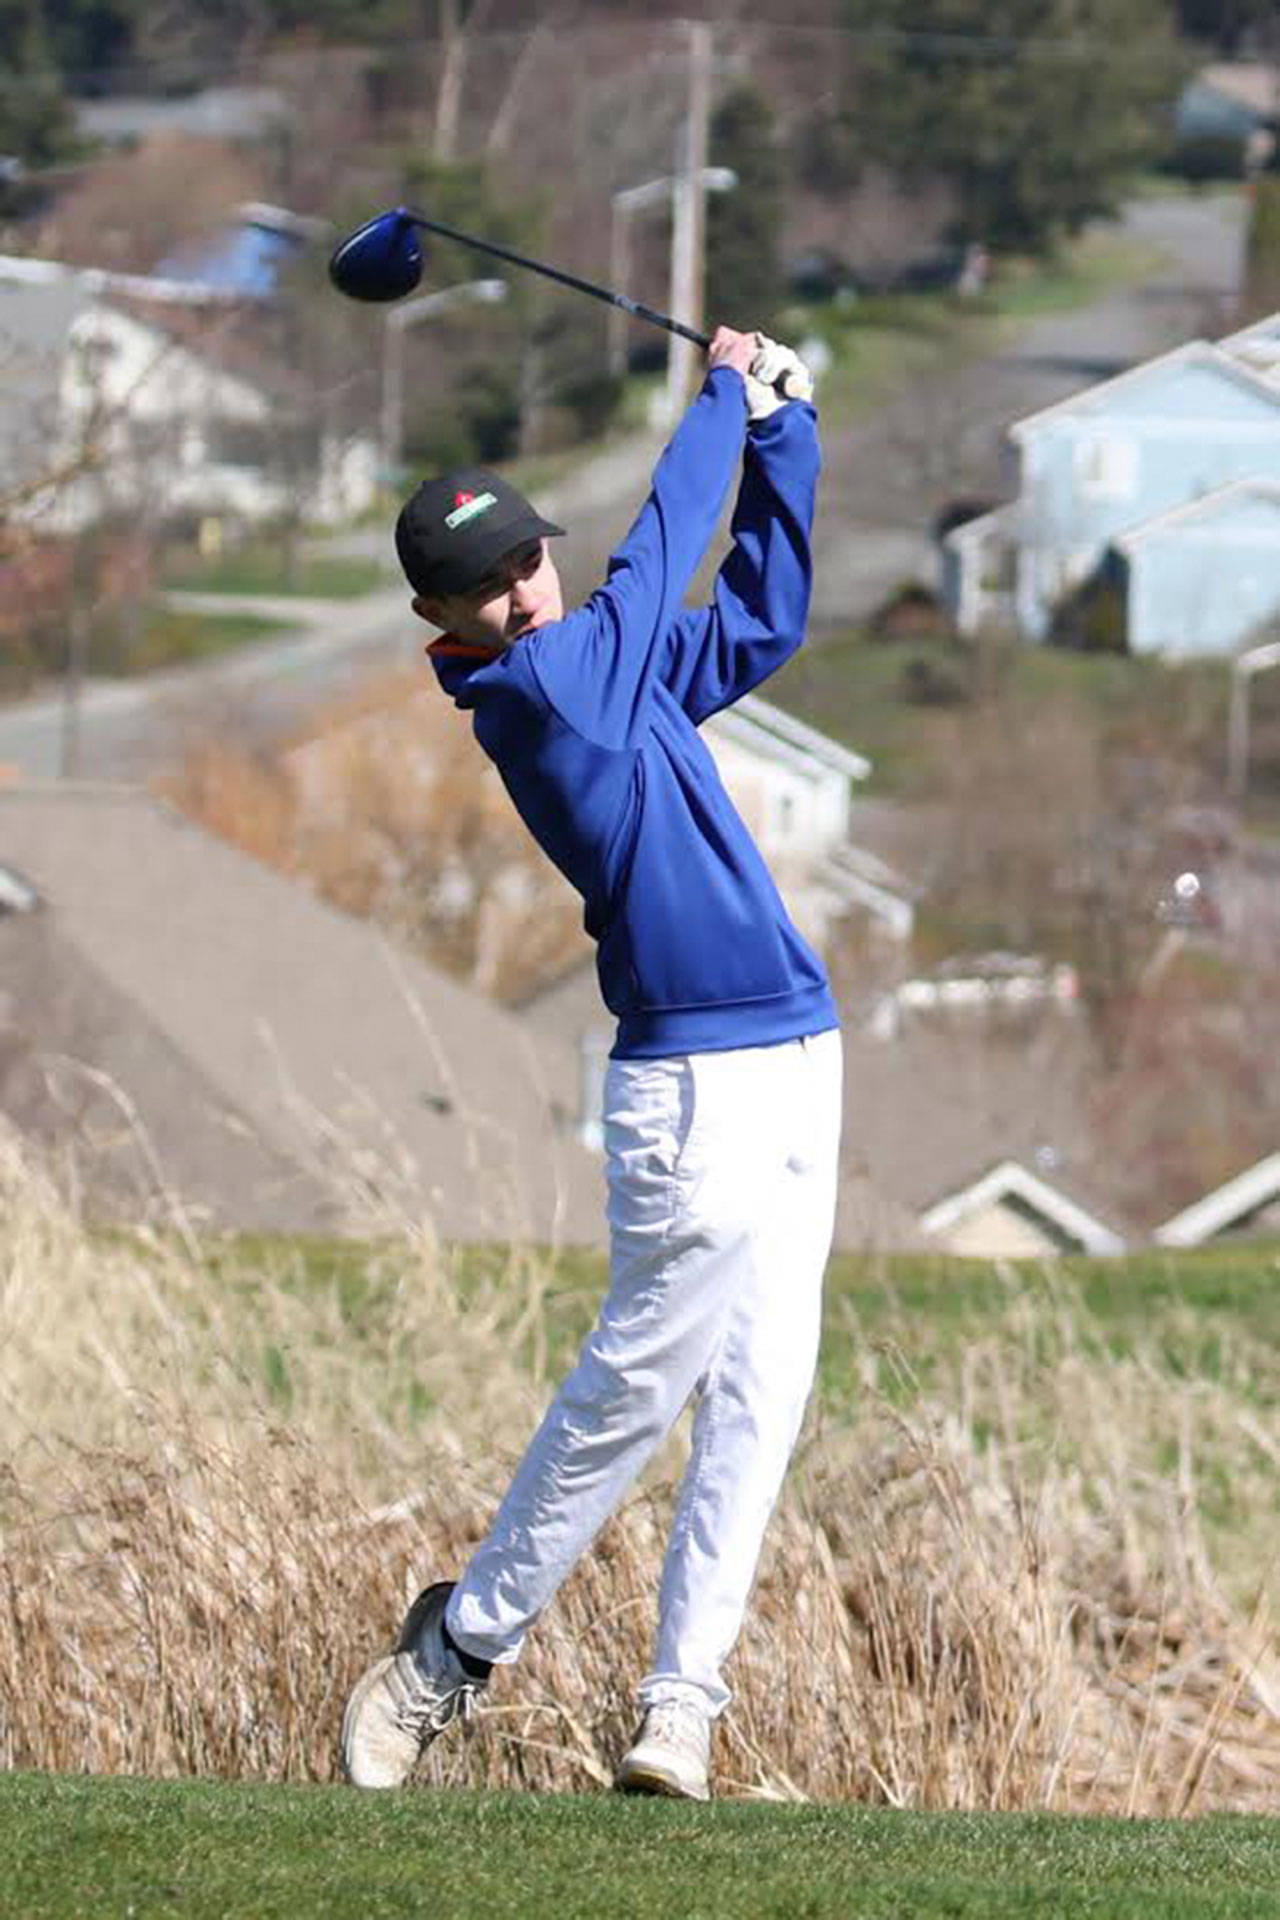 Nick Krantz qualified for the state golf tournament by placing 11th at district. (Photo by John Fisken)